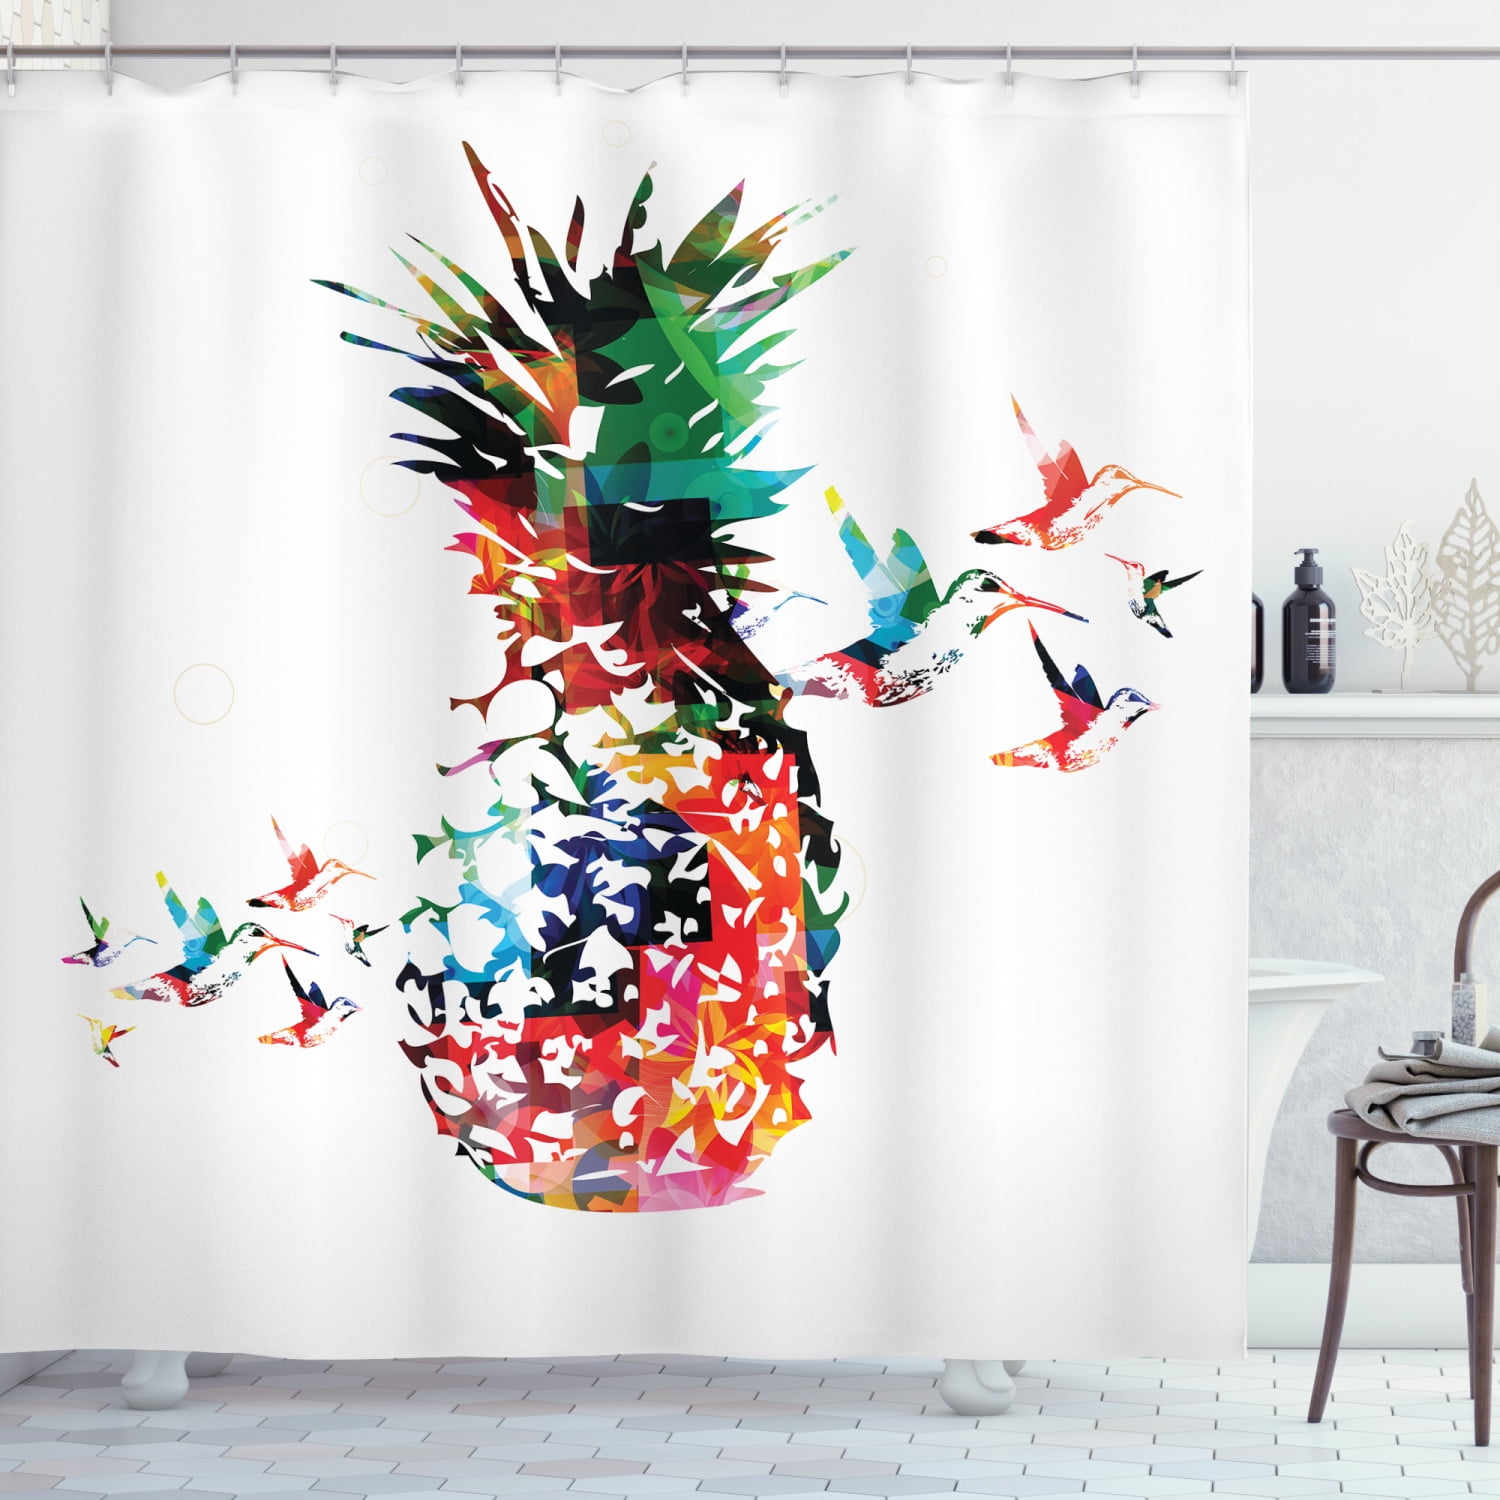 Abstract pineapple Shower Curtain Bathroom Decor Fabric & 12hooks 71x71inches 